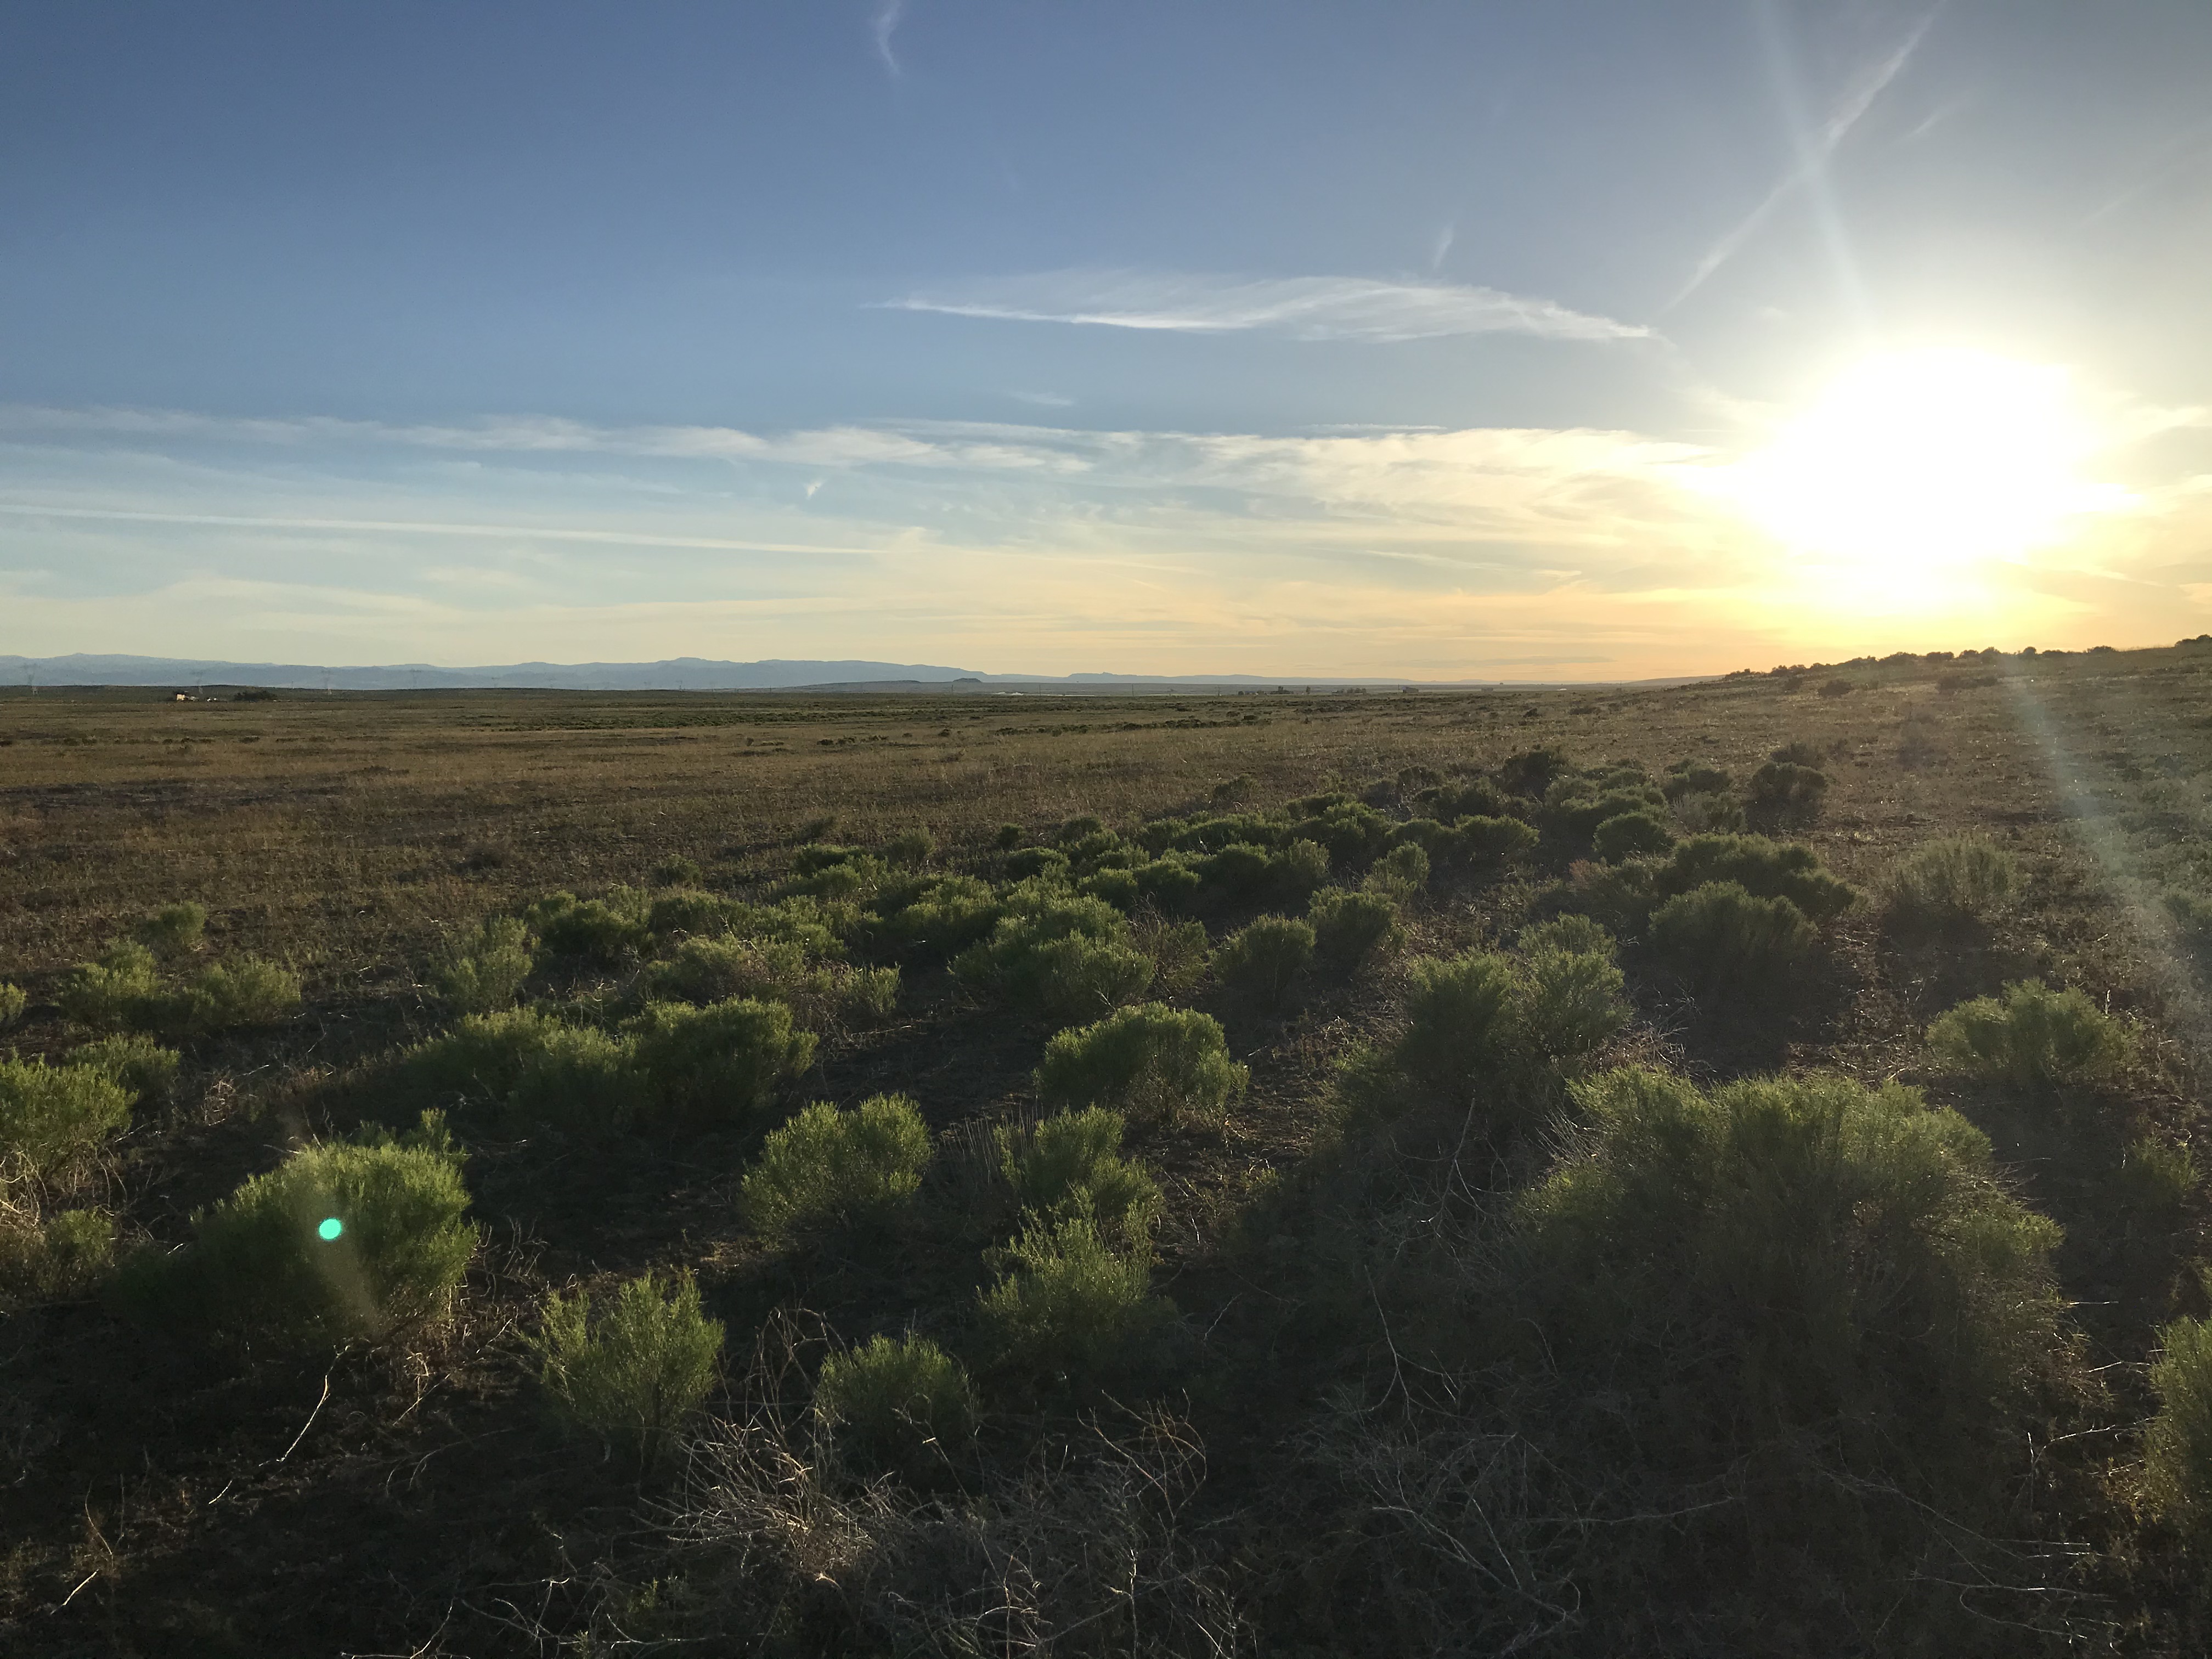 the sun rises over a landscape with rabbit brush shrubs and grasses